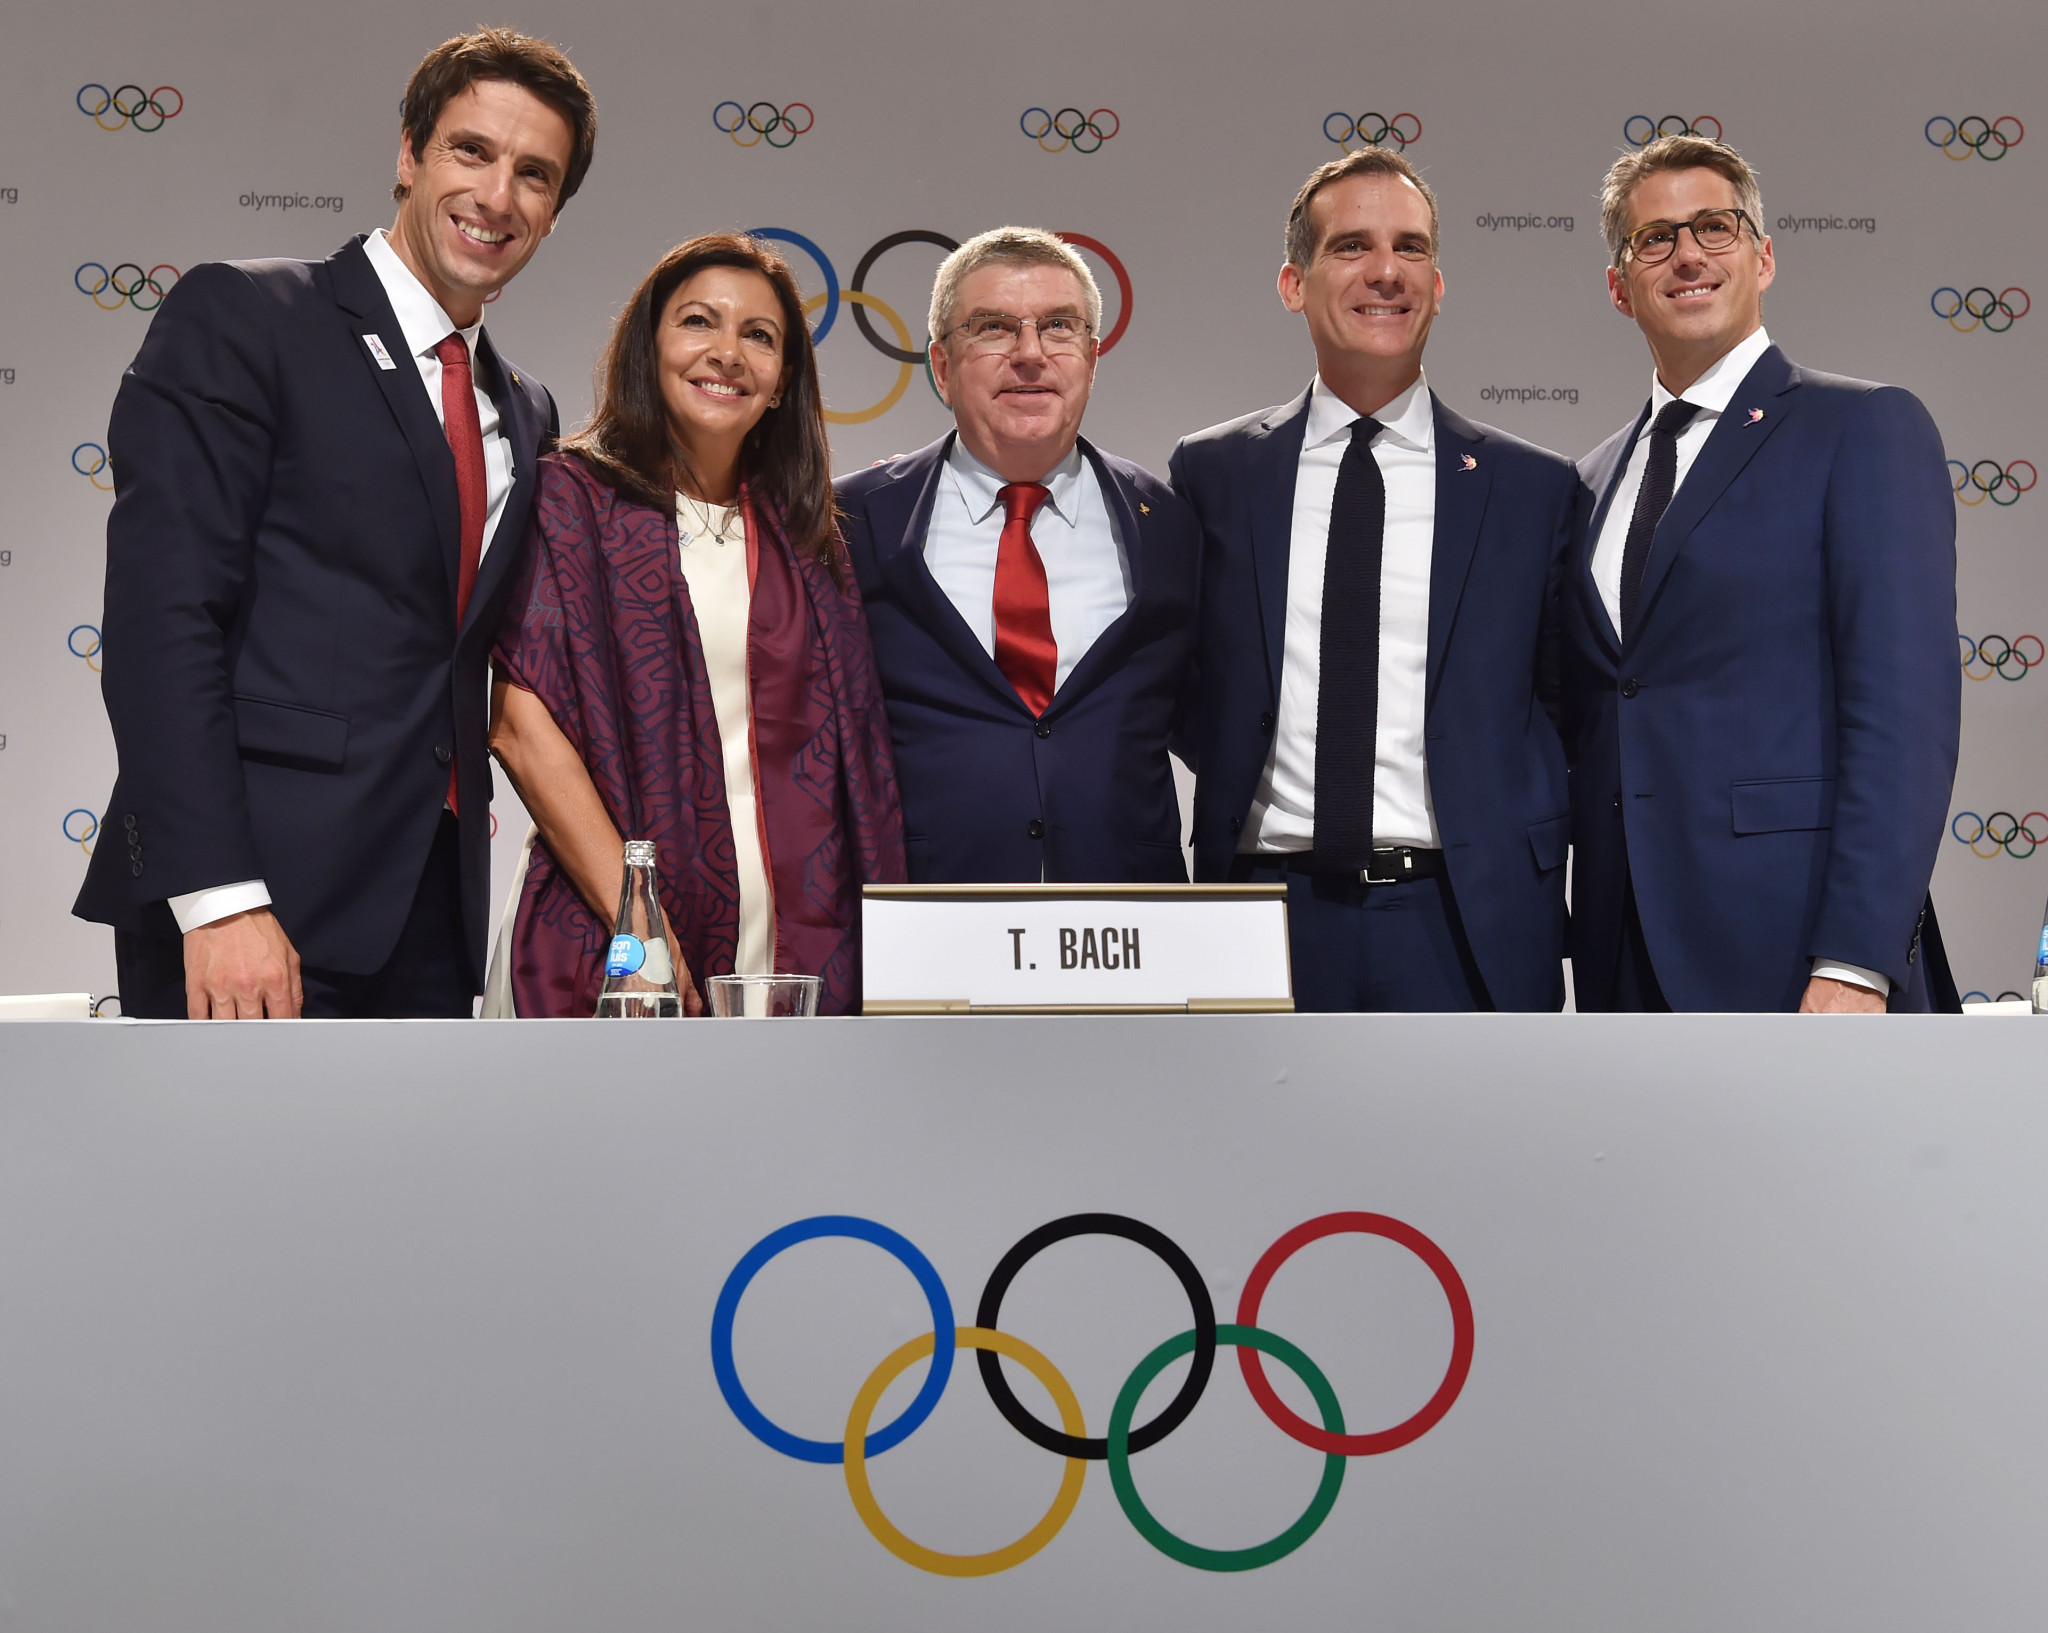 Los Angeles was award the 2028 Olympic and Paralympic Games back in 2017 ©Getty Images